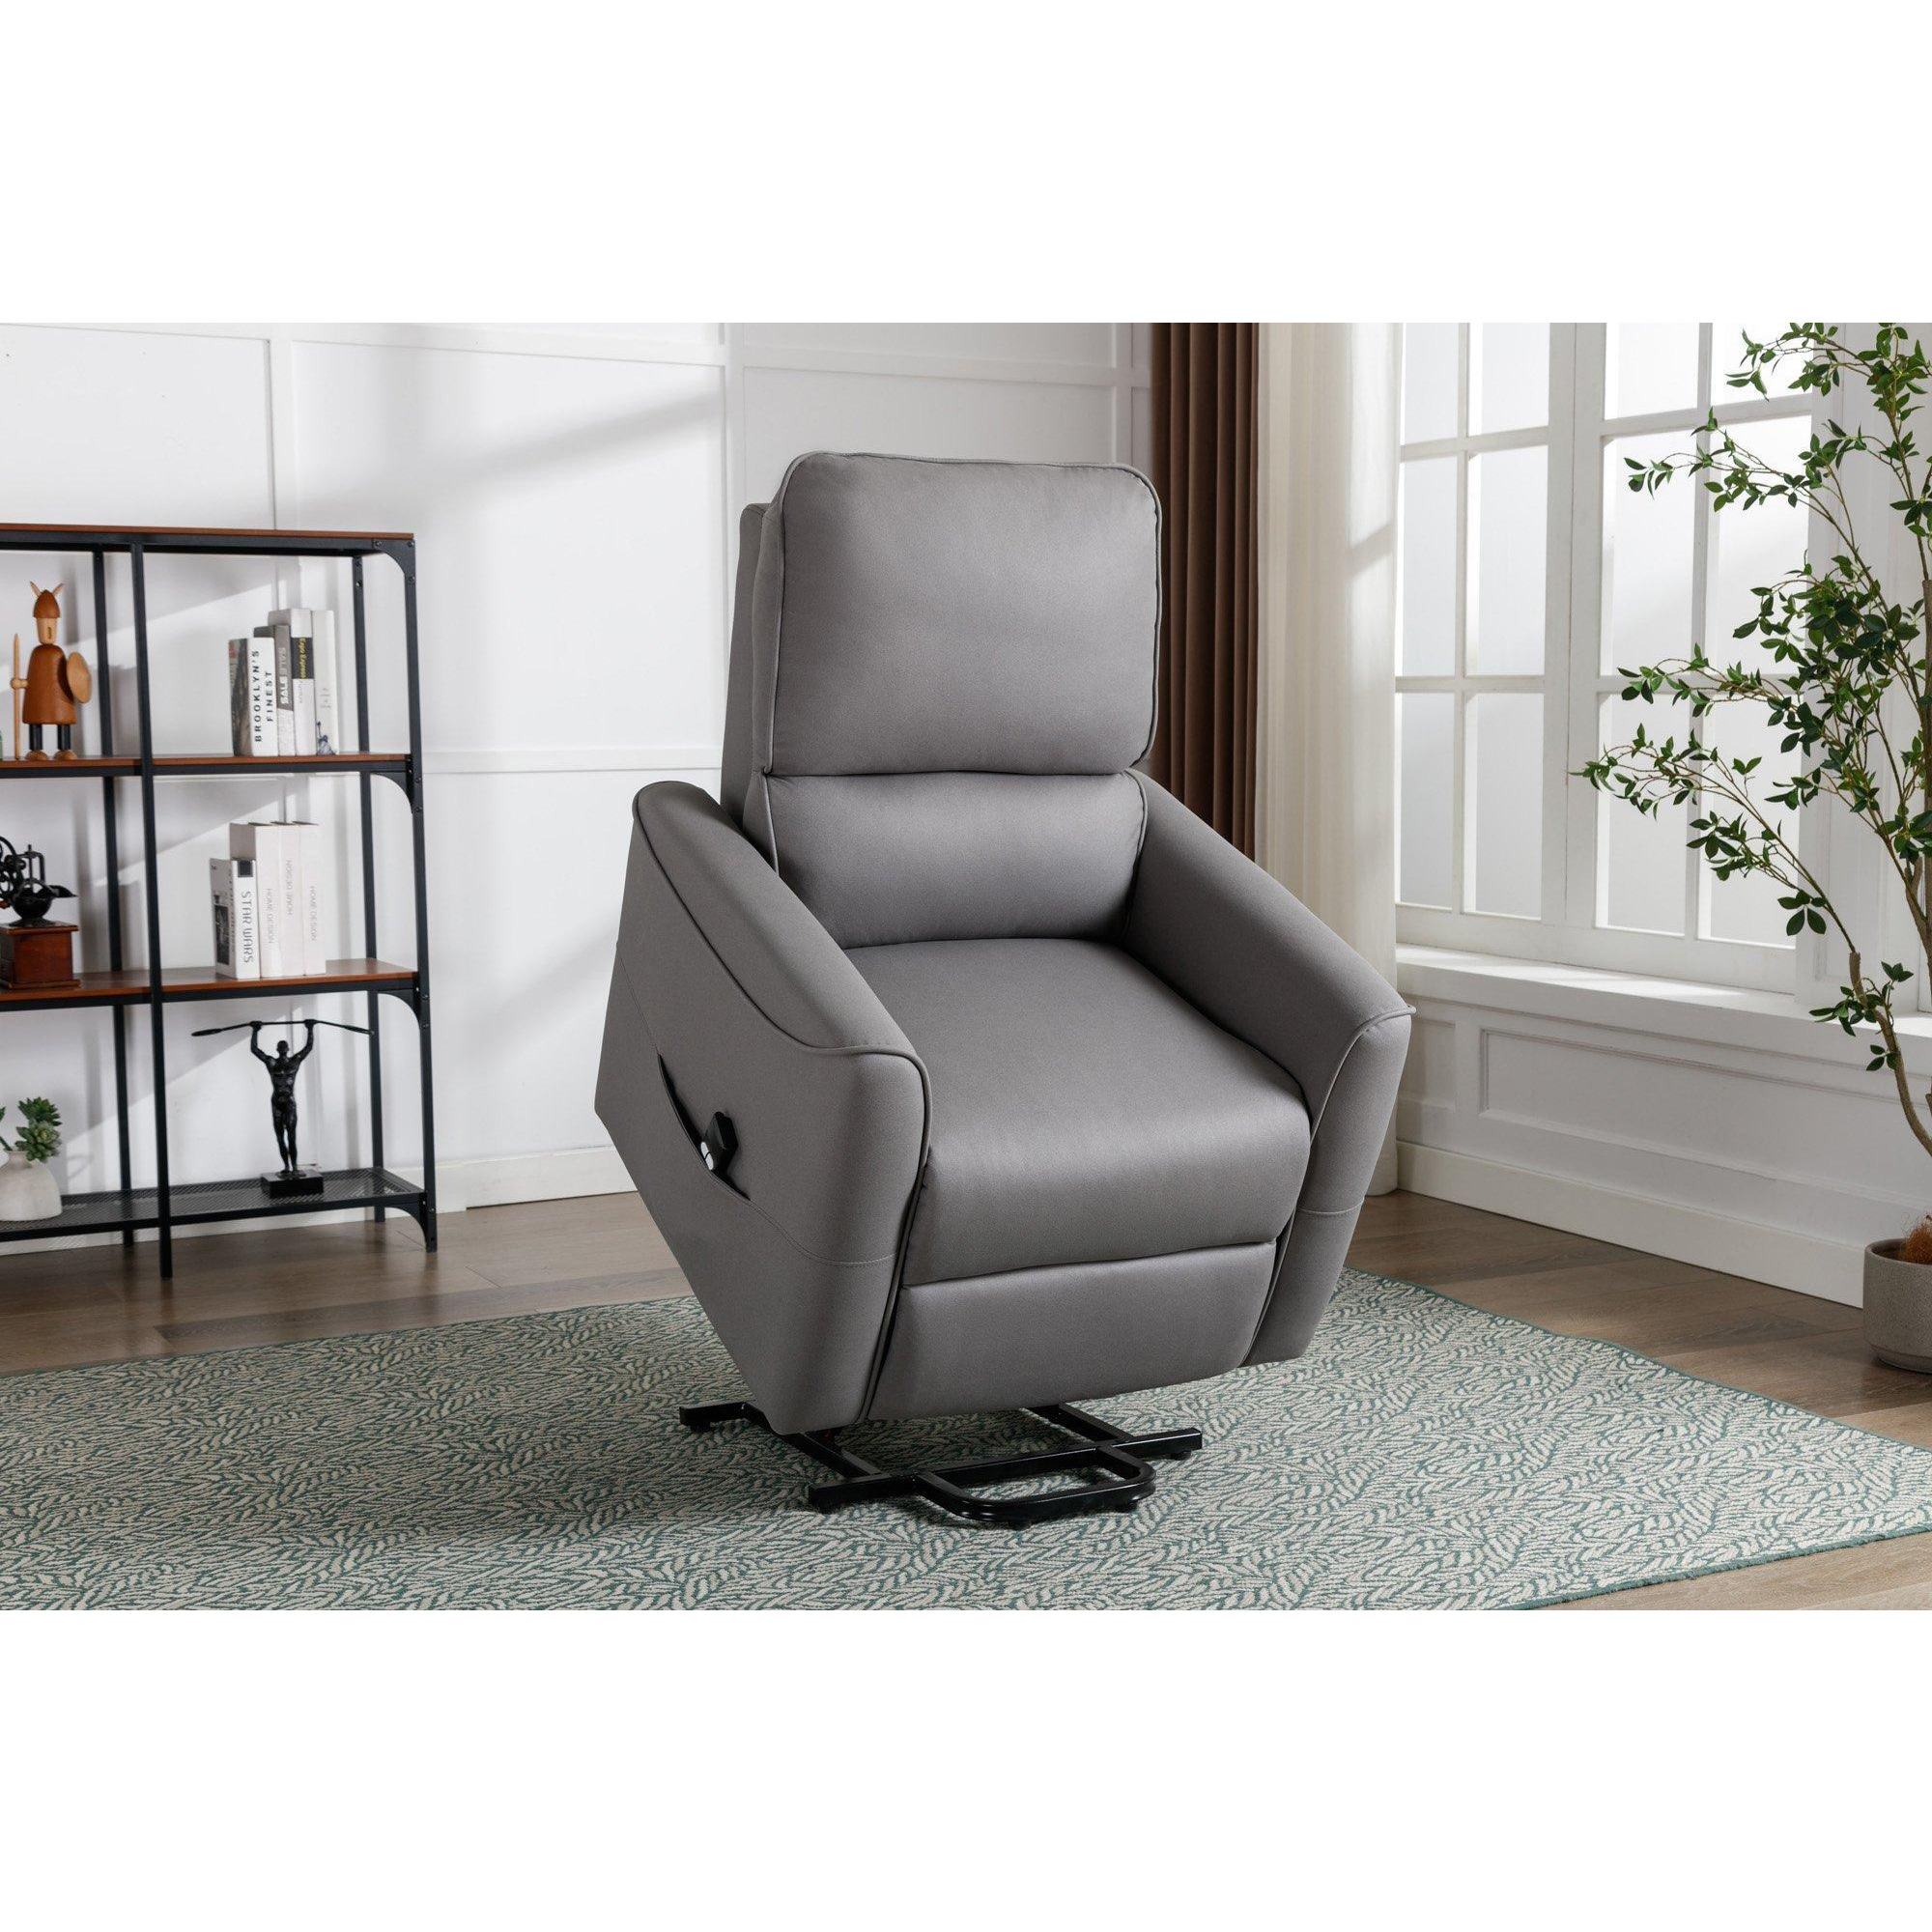 Clifton Electric Fabric Single Motor Rise Recliner Lift Mobility Chair - image 1